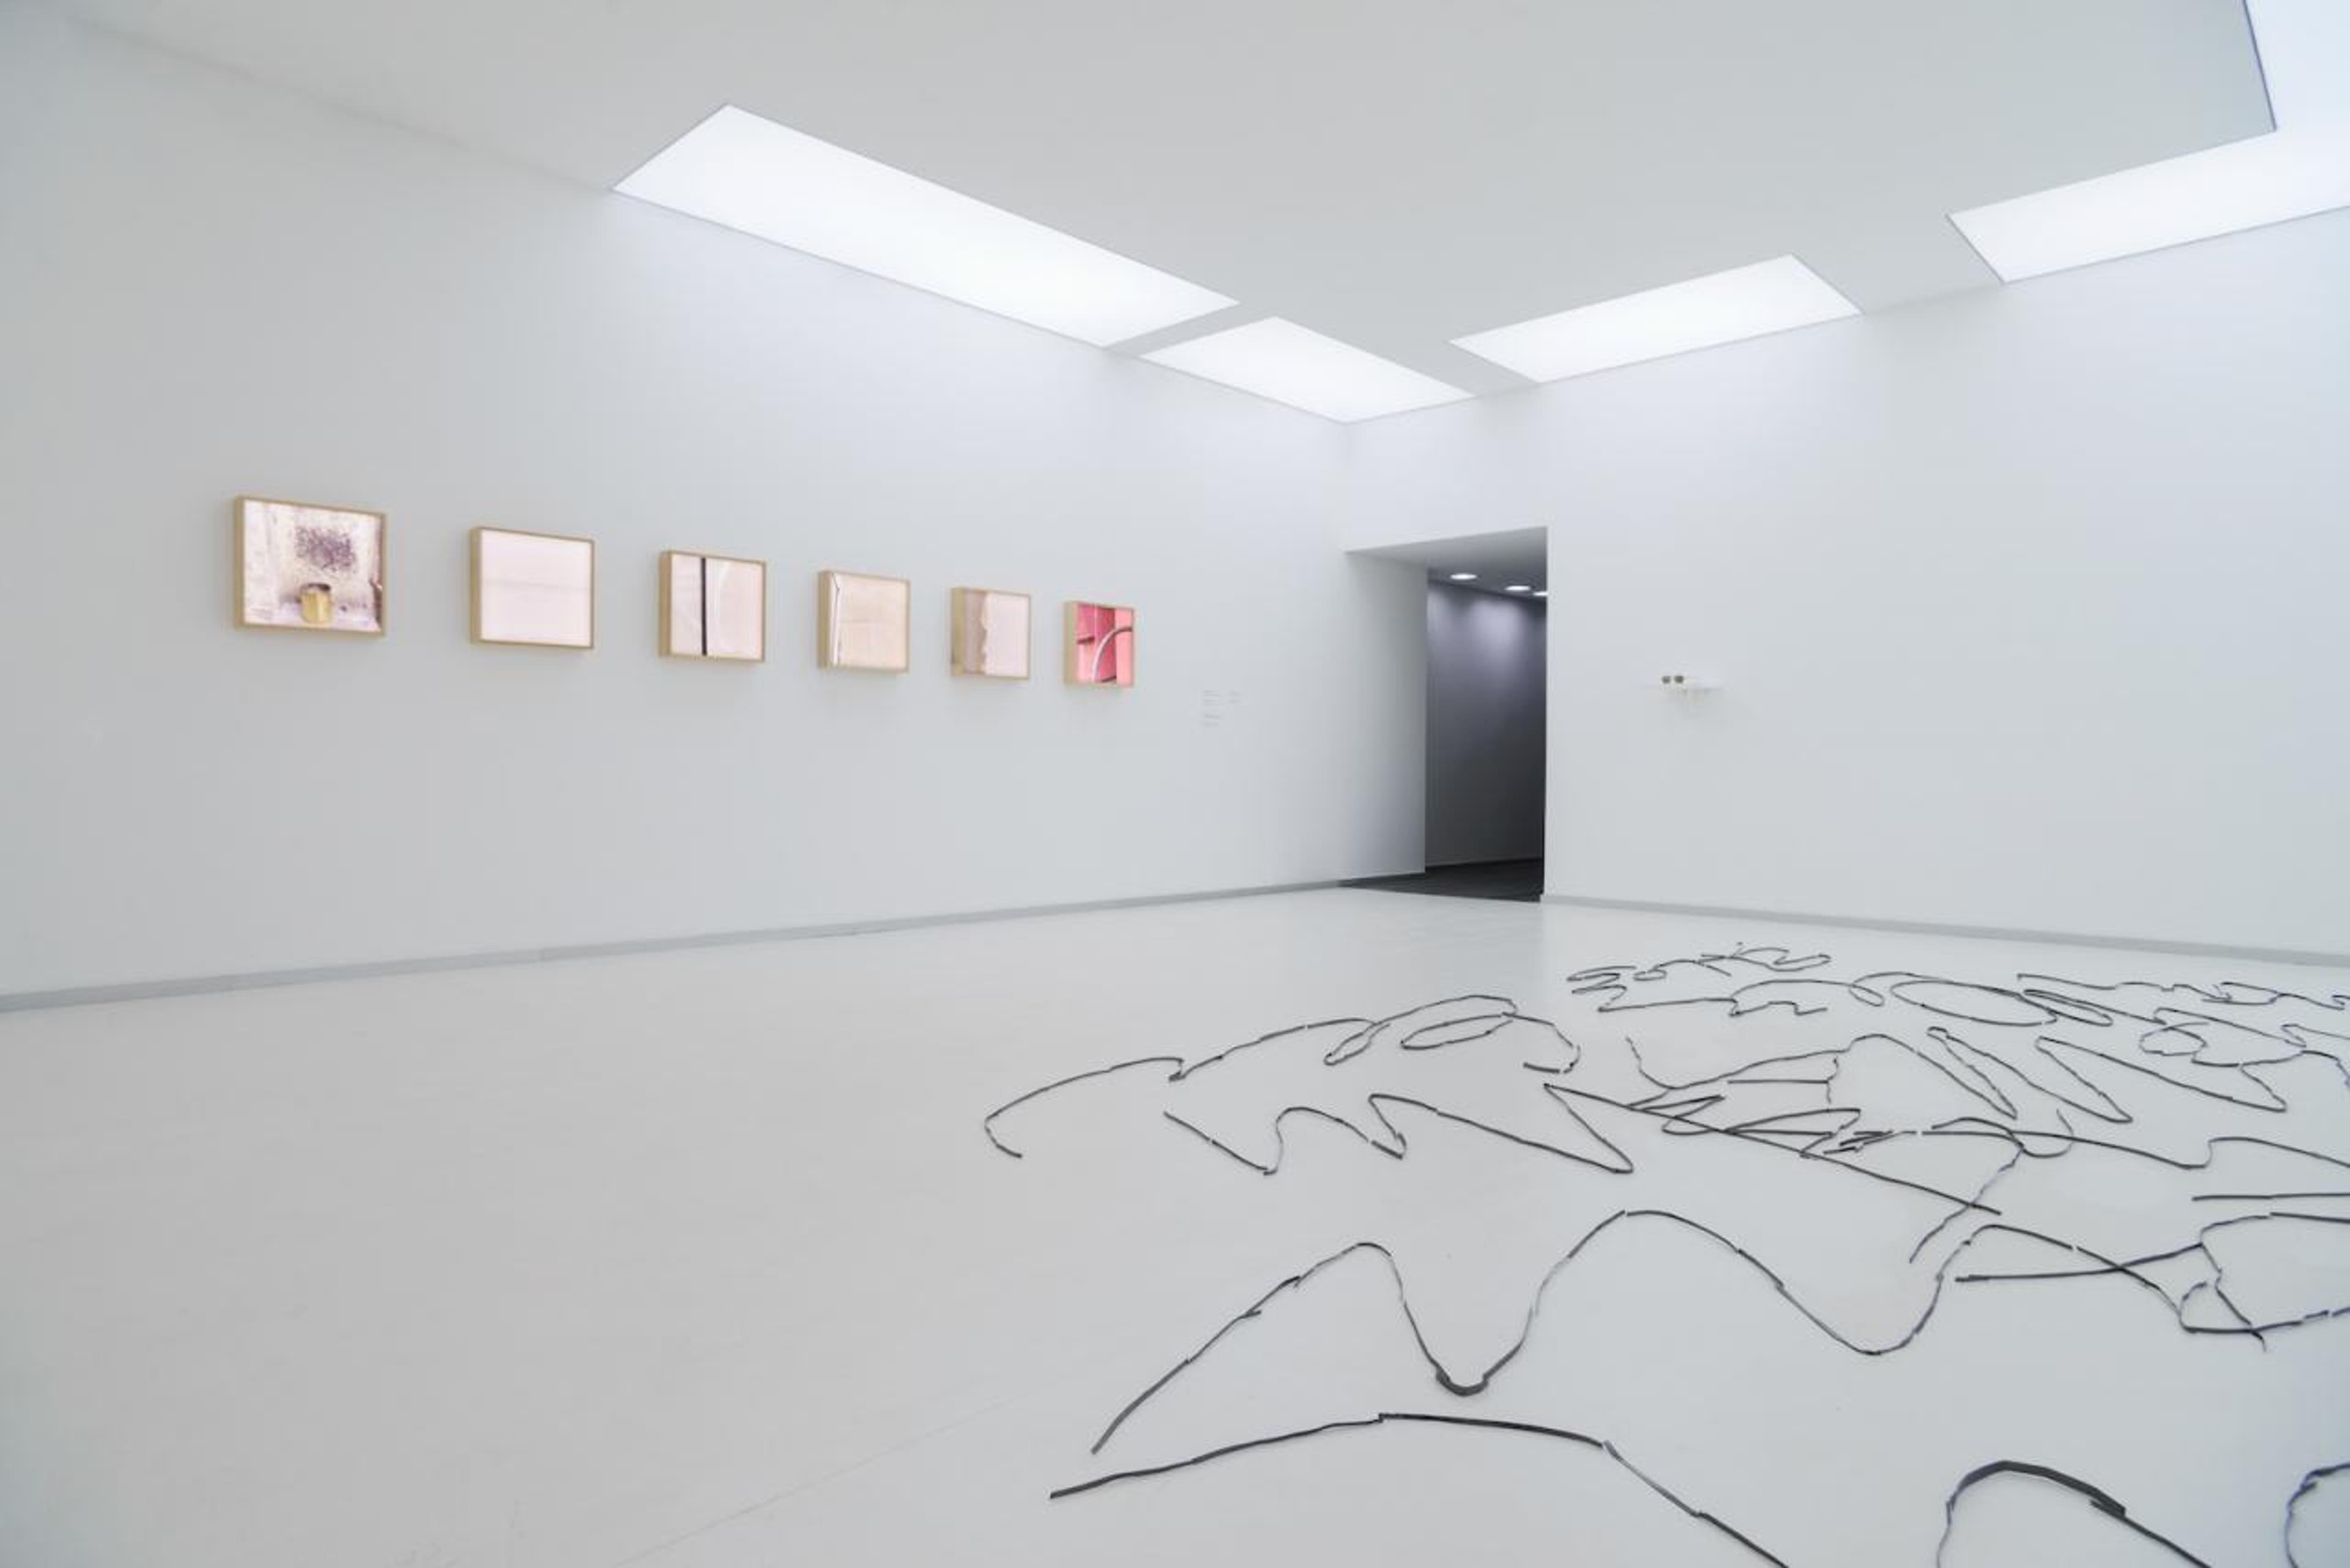 Anna Zvyagintseva Scratches (2018) Installation view of the exhibition of the shortlisted artists for the PinchukArtCentre Prize 2018